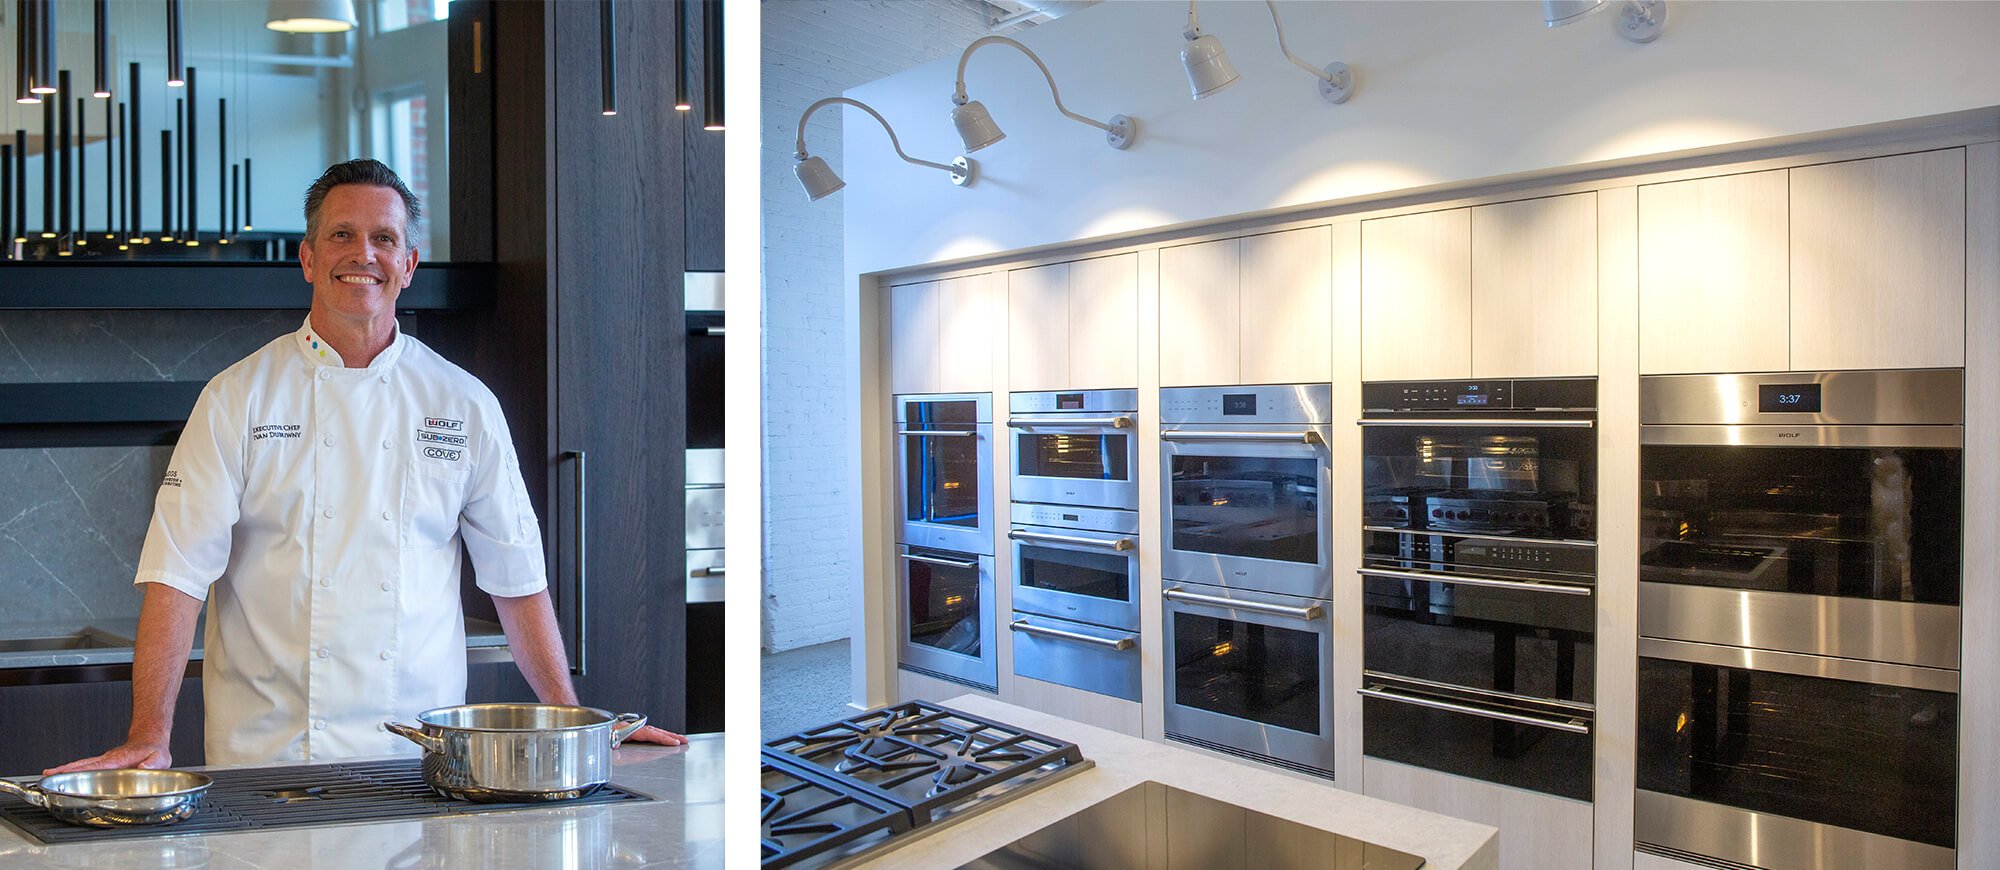 Two images: First image is chef in whites smiling in his kitchen. the other shows a wall of different built-in warming and baking ovens.